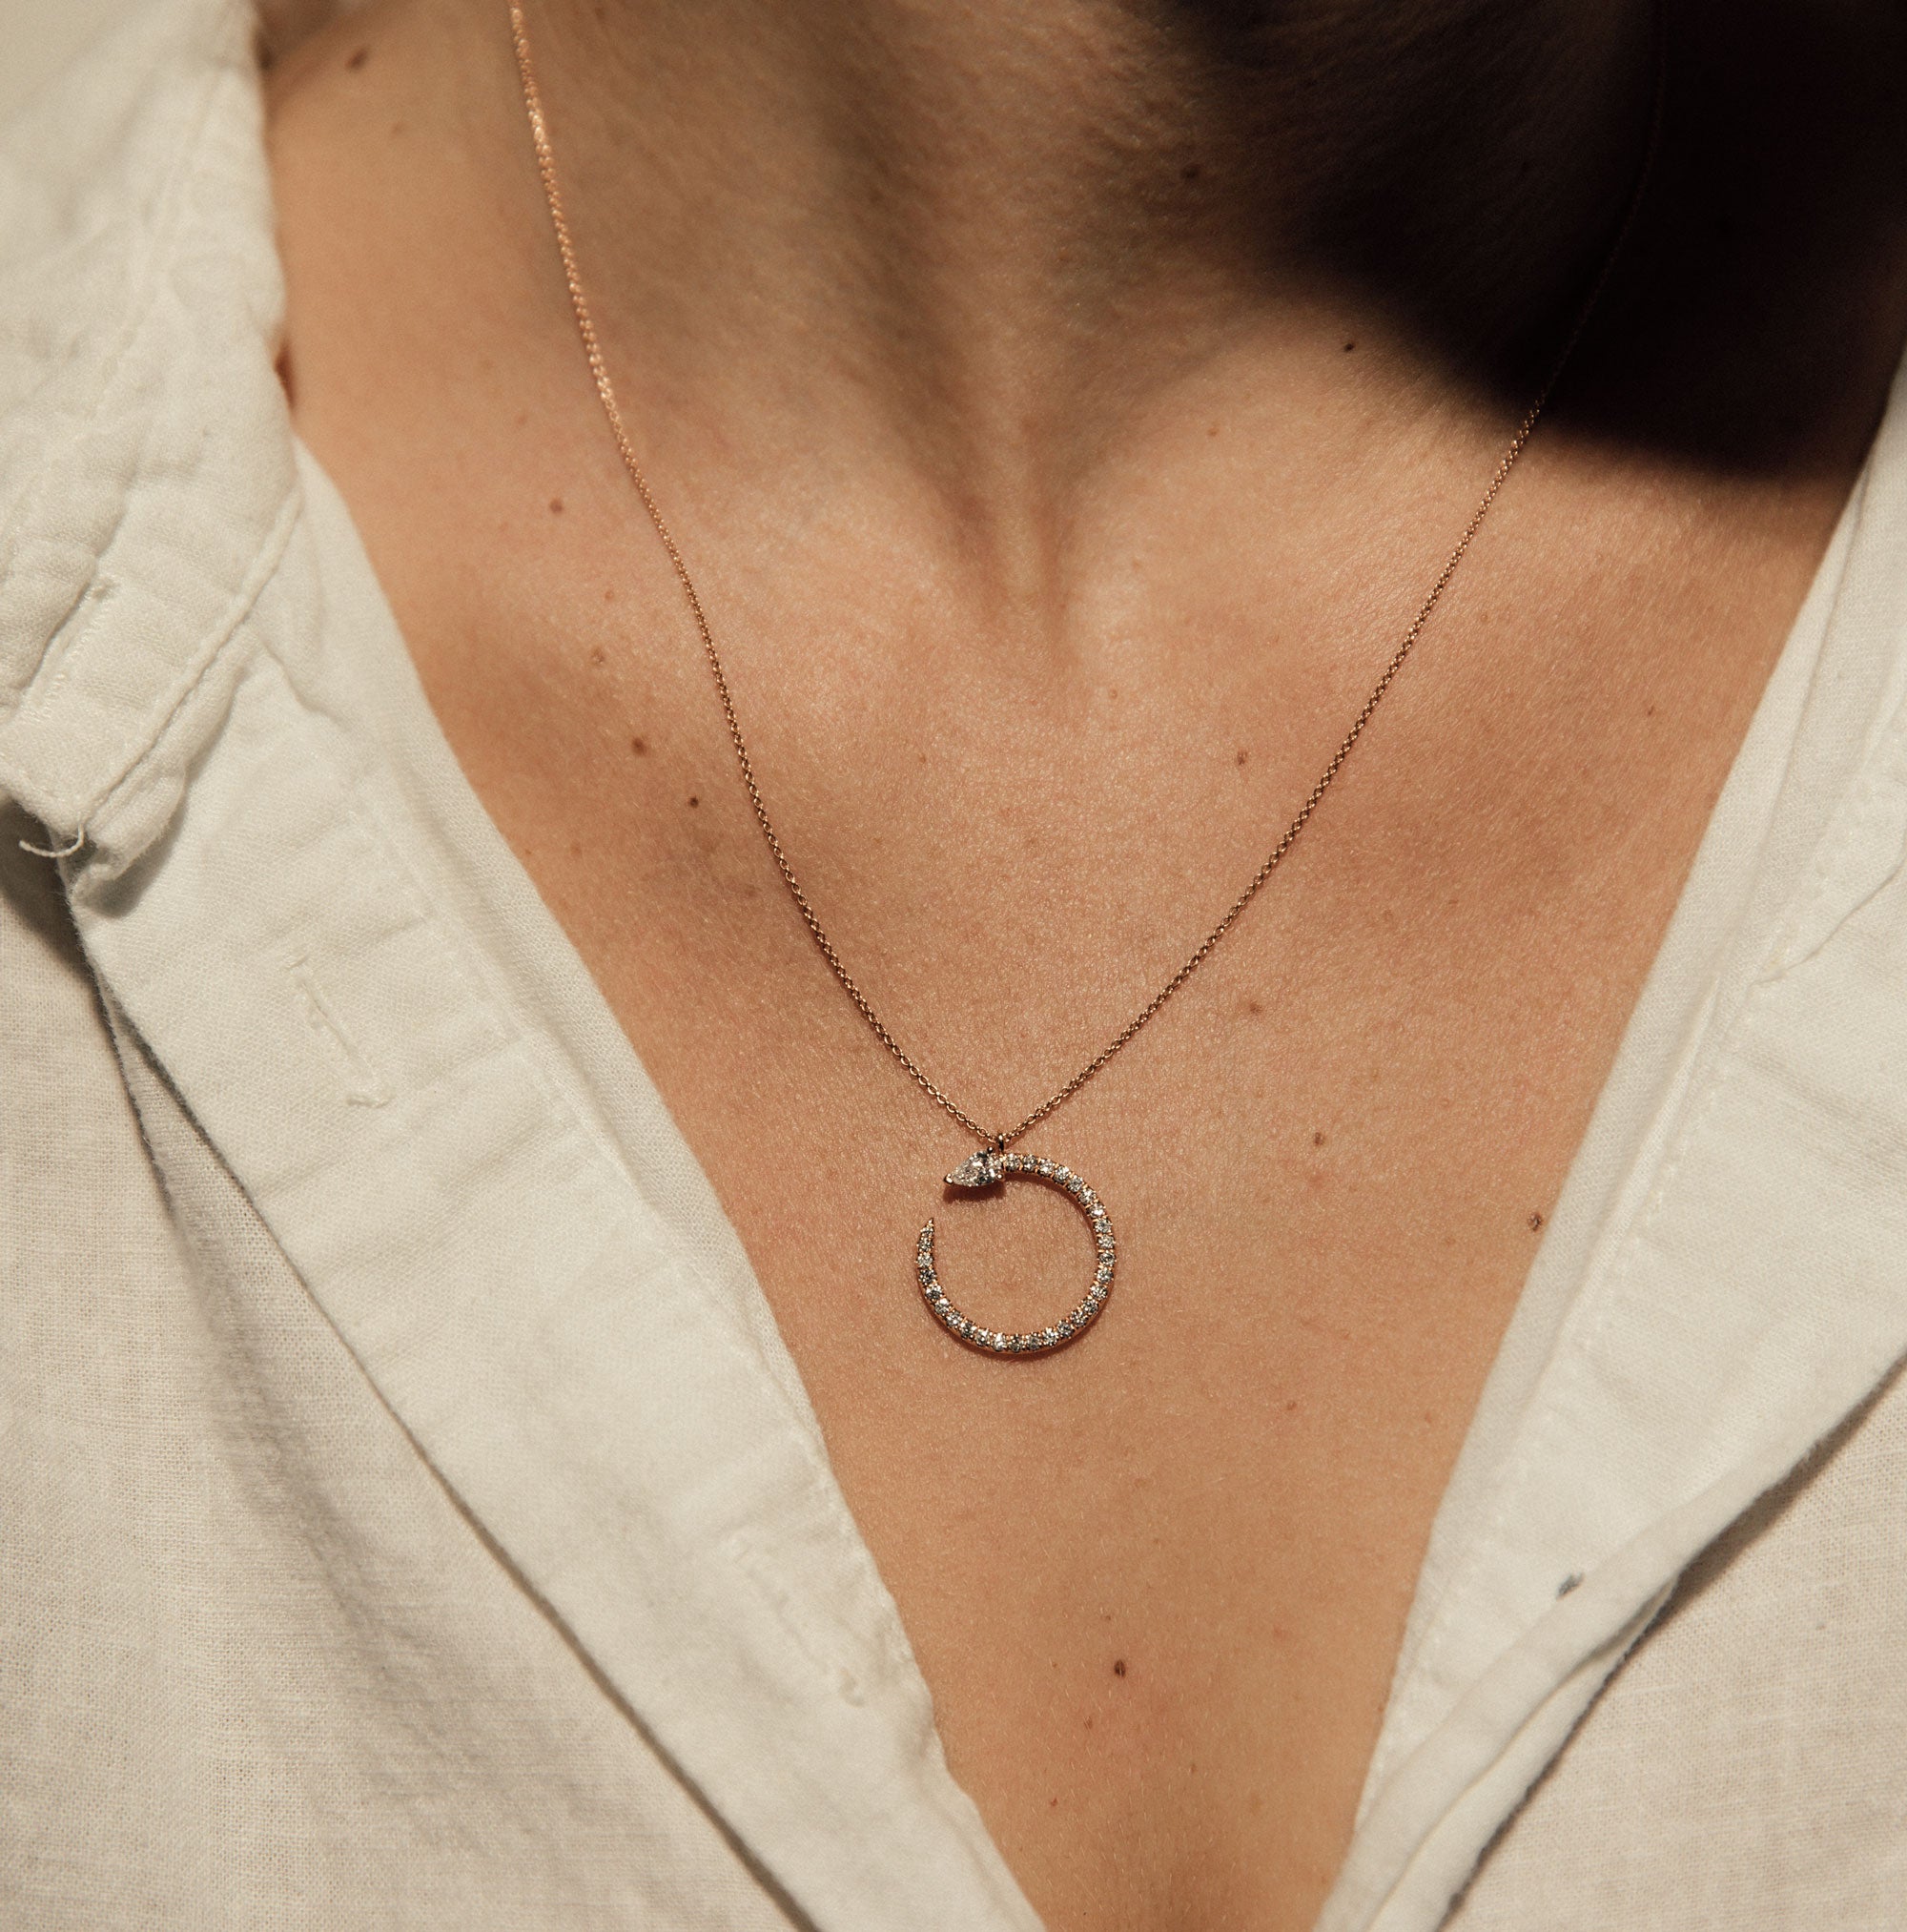 The Serpent Necklace shown modeled in rose gold. 